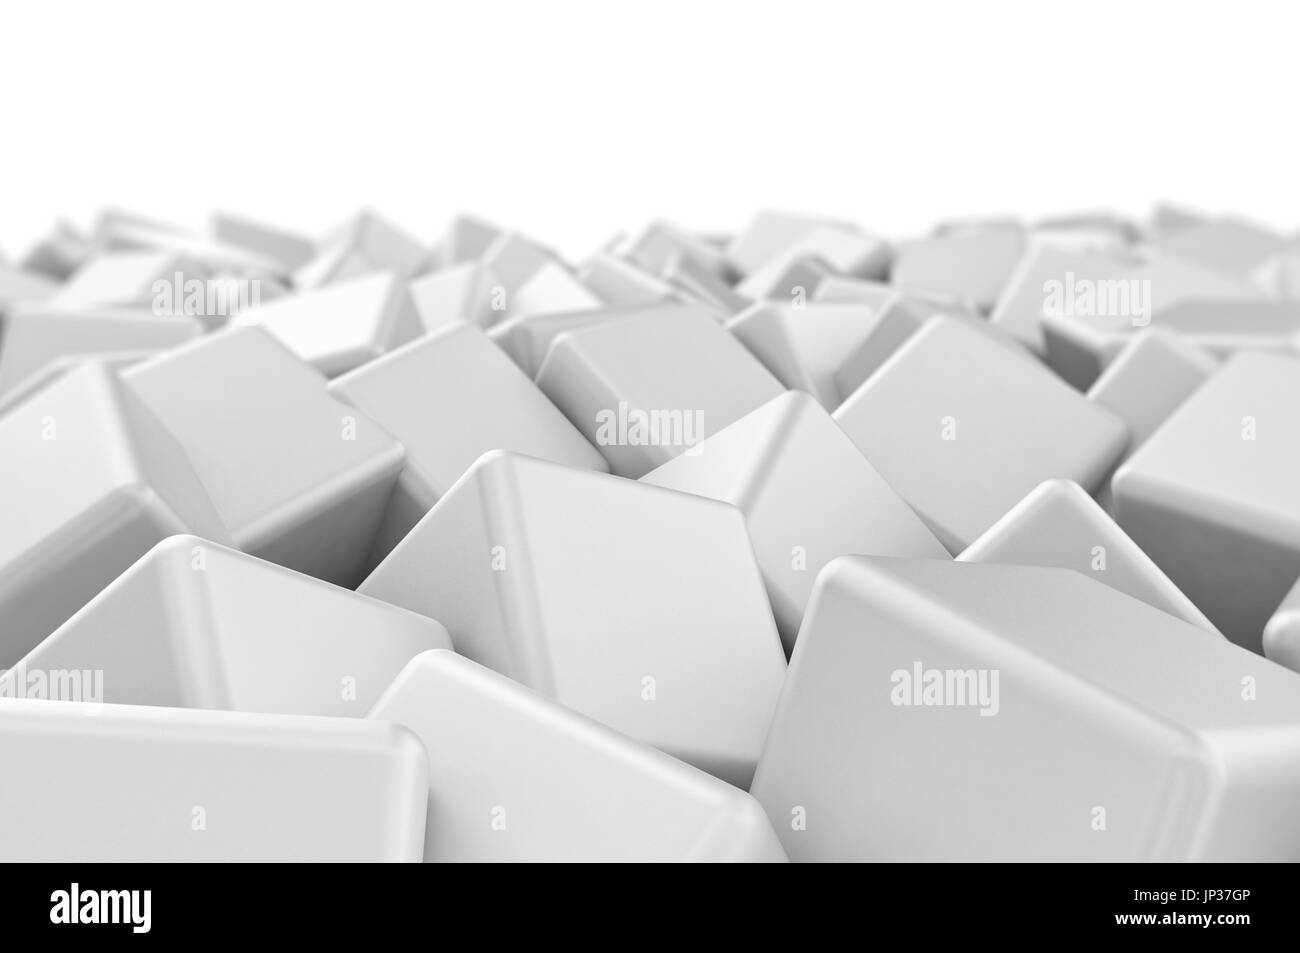 Abstract 3d rendering of chaotic cubes Stock Photo